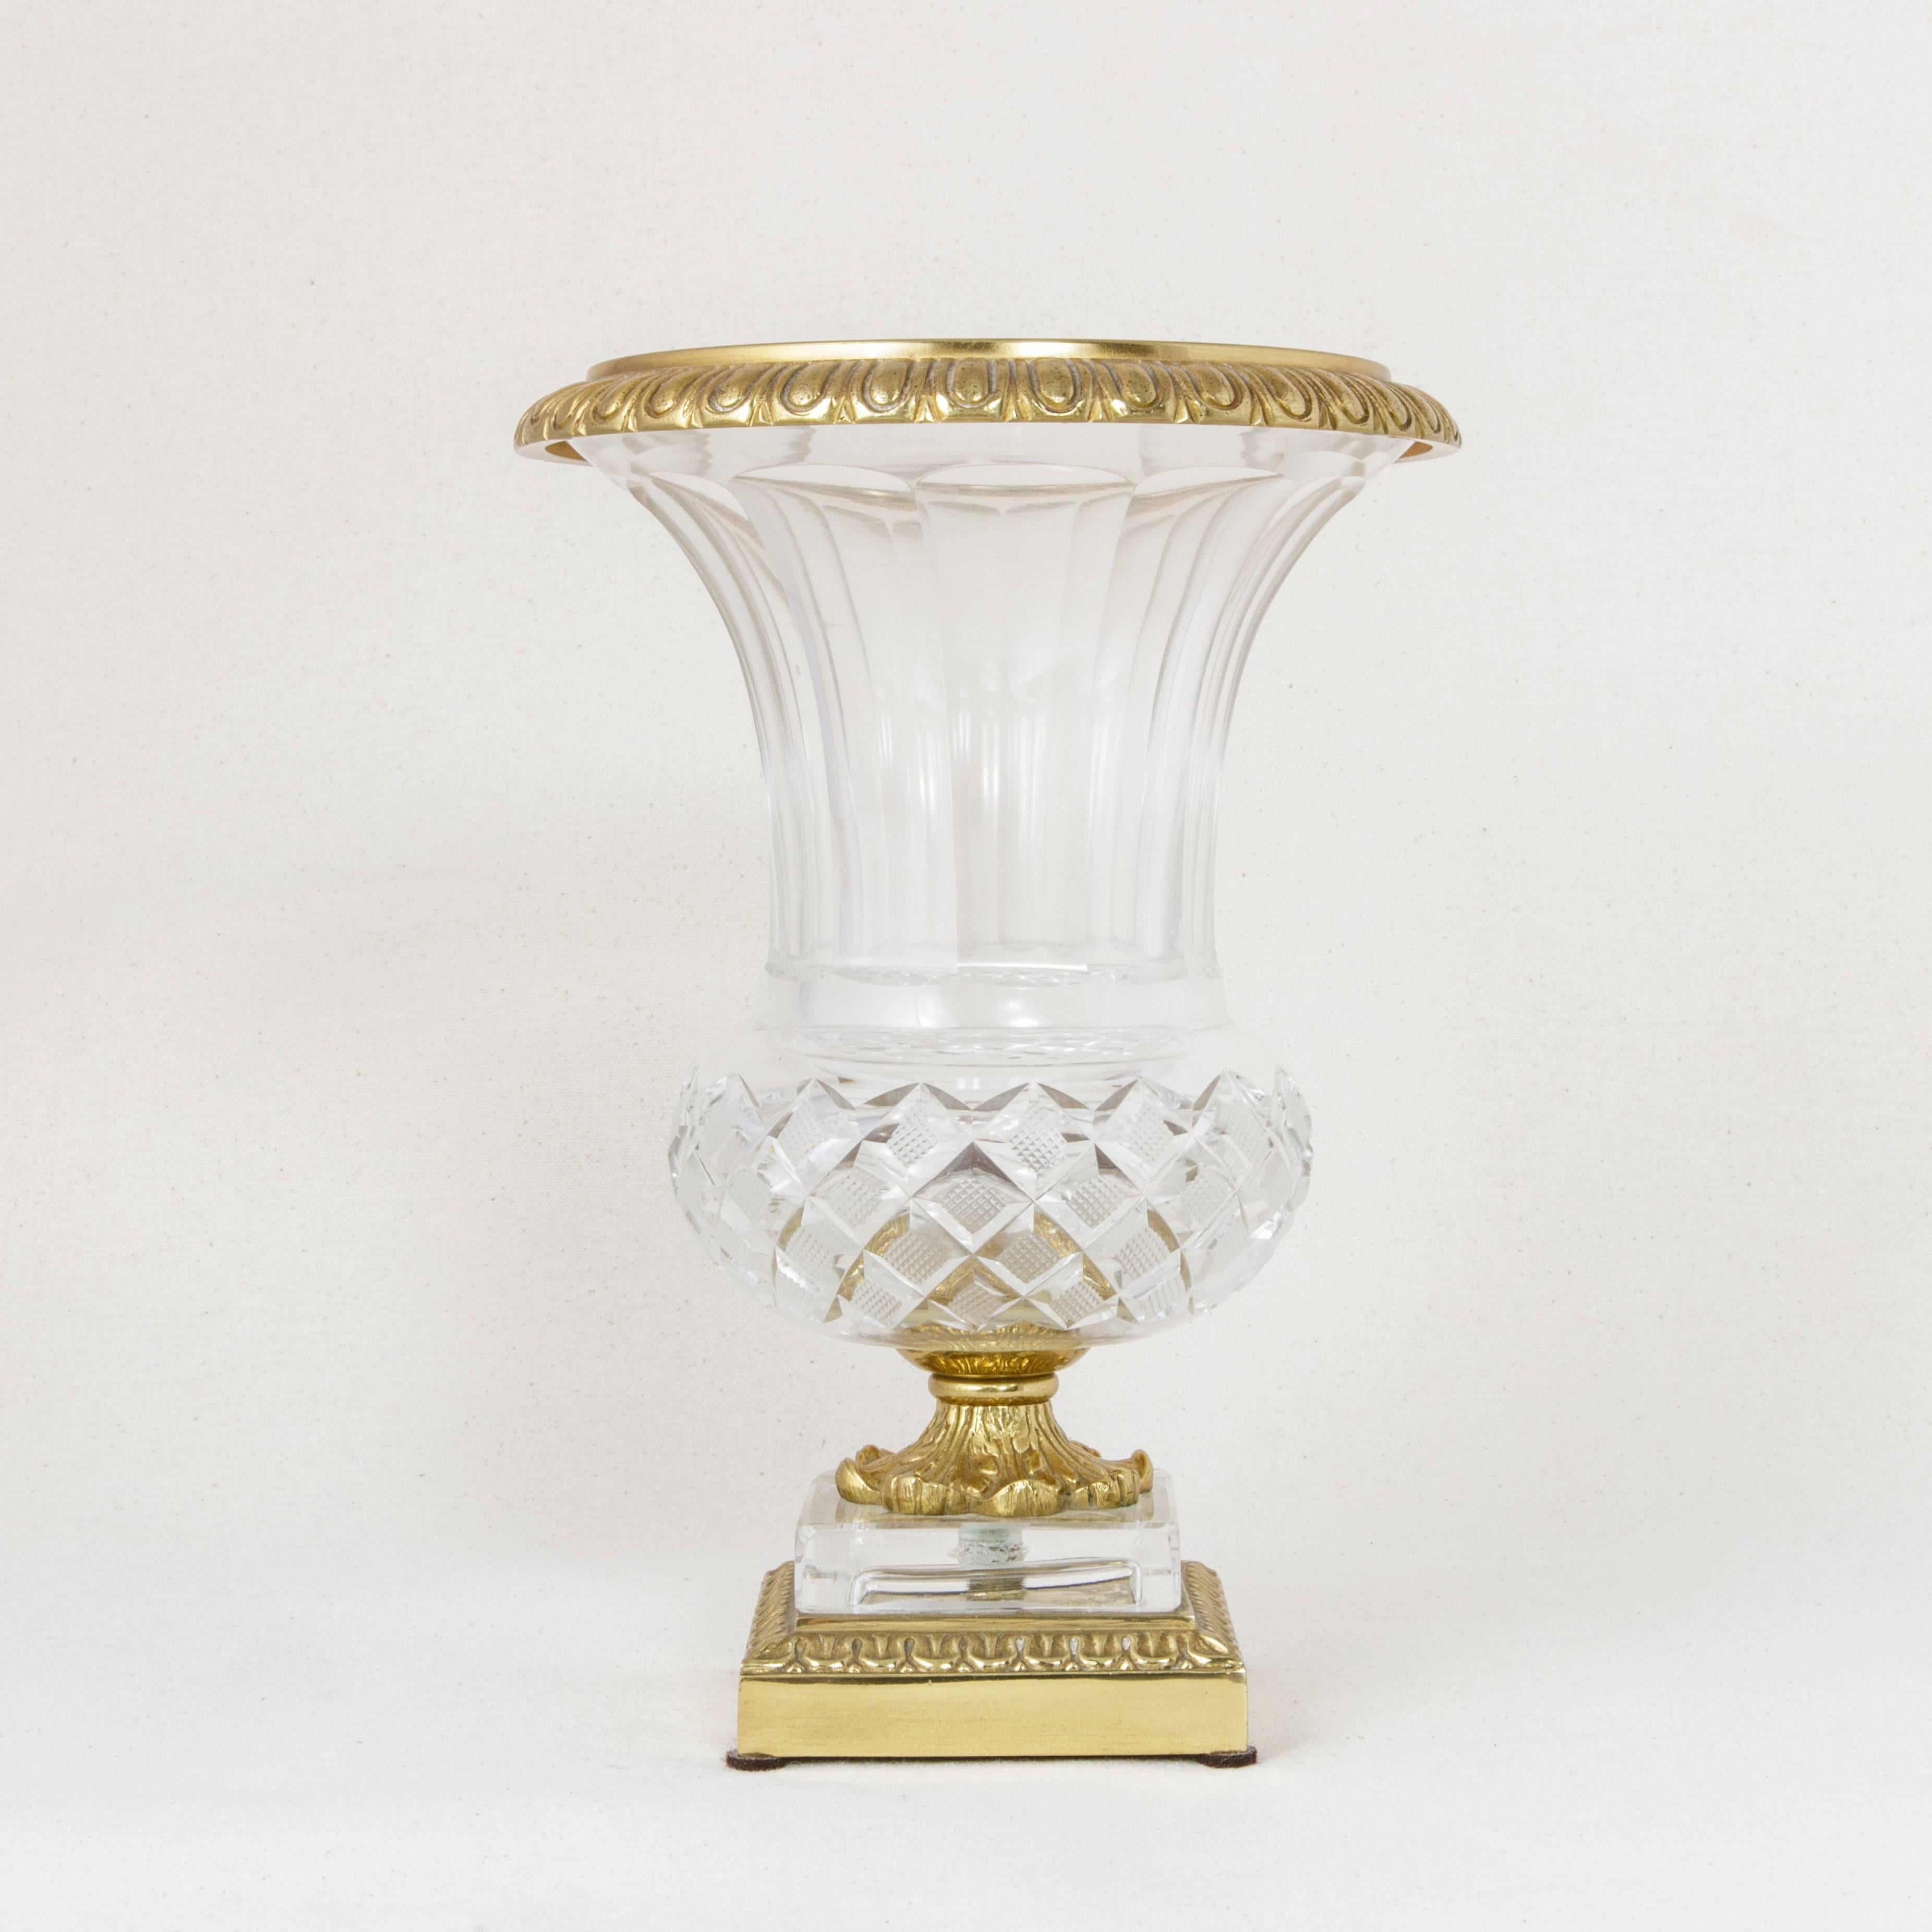 An elegant cut-glass piece from the Art Deco period emulating a Classic Medicis urn, this vase features a hand-cut grid pattern, fluted sides, and an upper bronze rim. It is mounted on a bronze stem of draped acanthus leaves supported by a glass